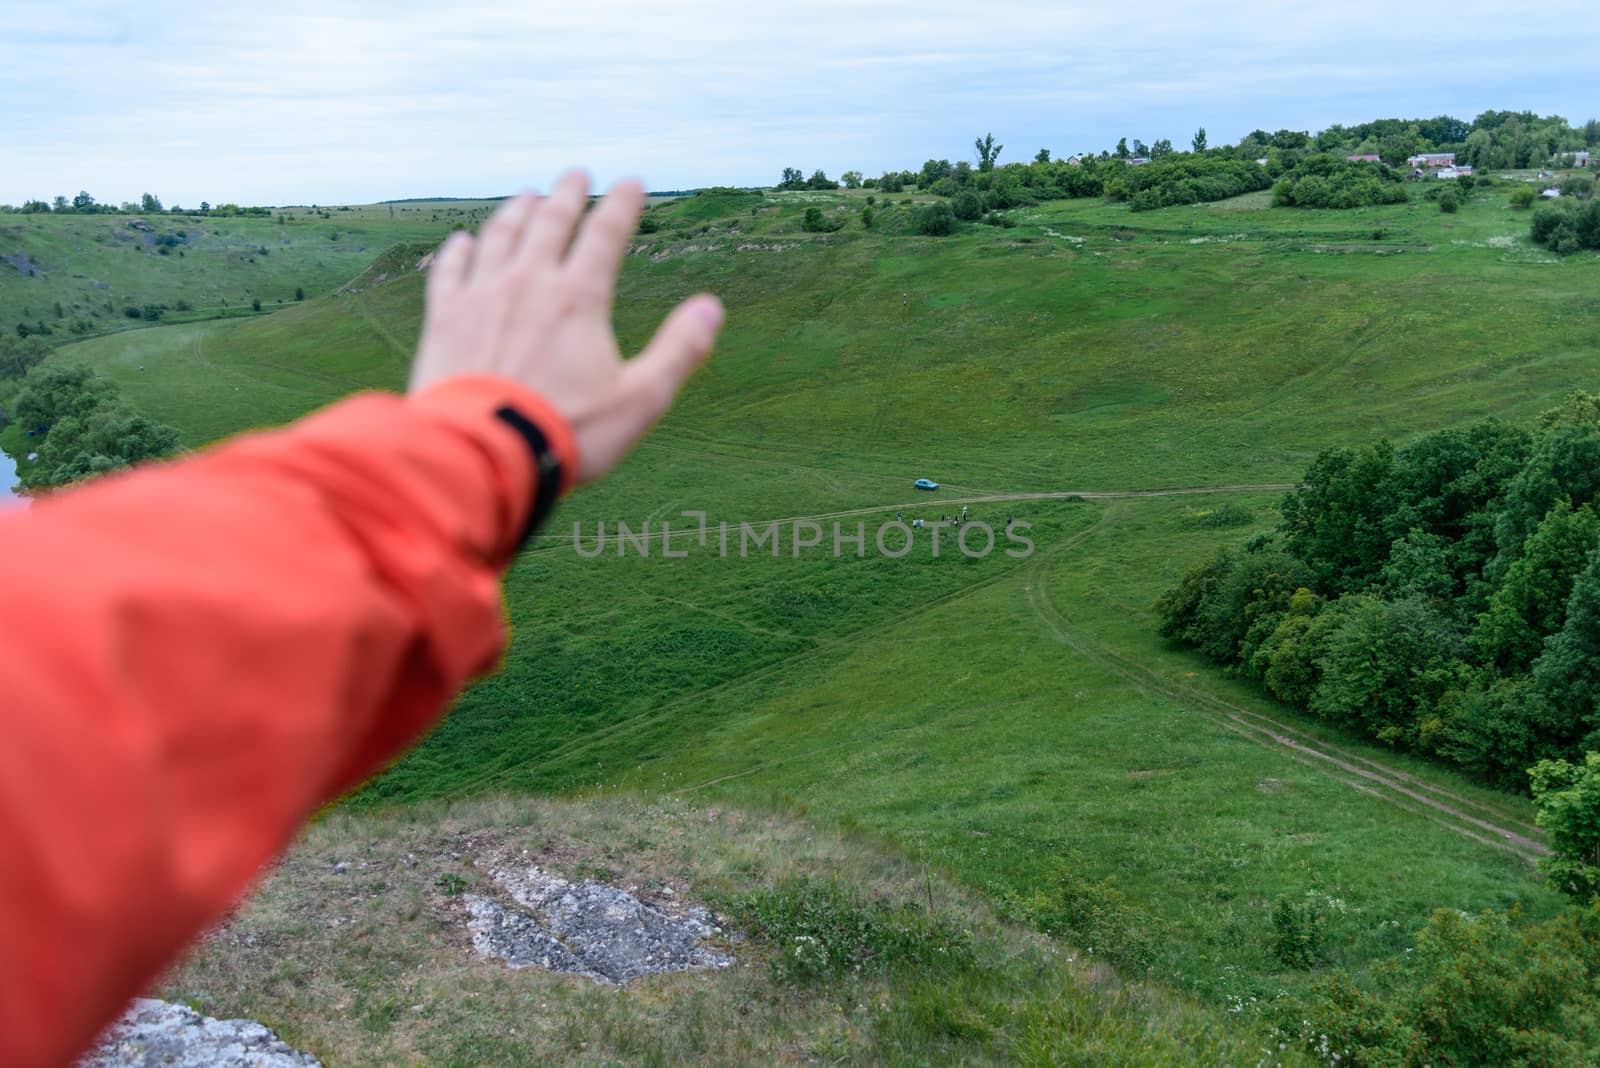 Man traveler in an orange jacket inspects the neighborhood, showing his hand on the landscape, selective focus.